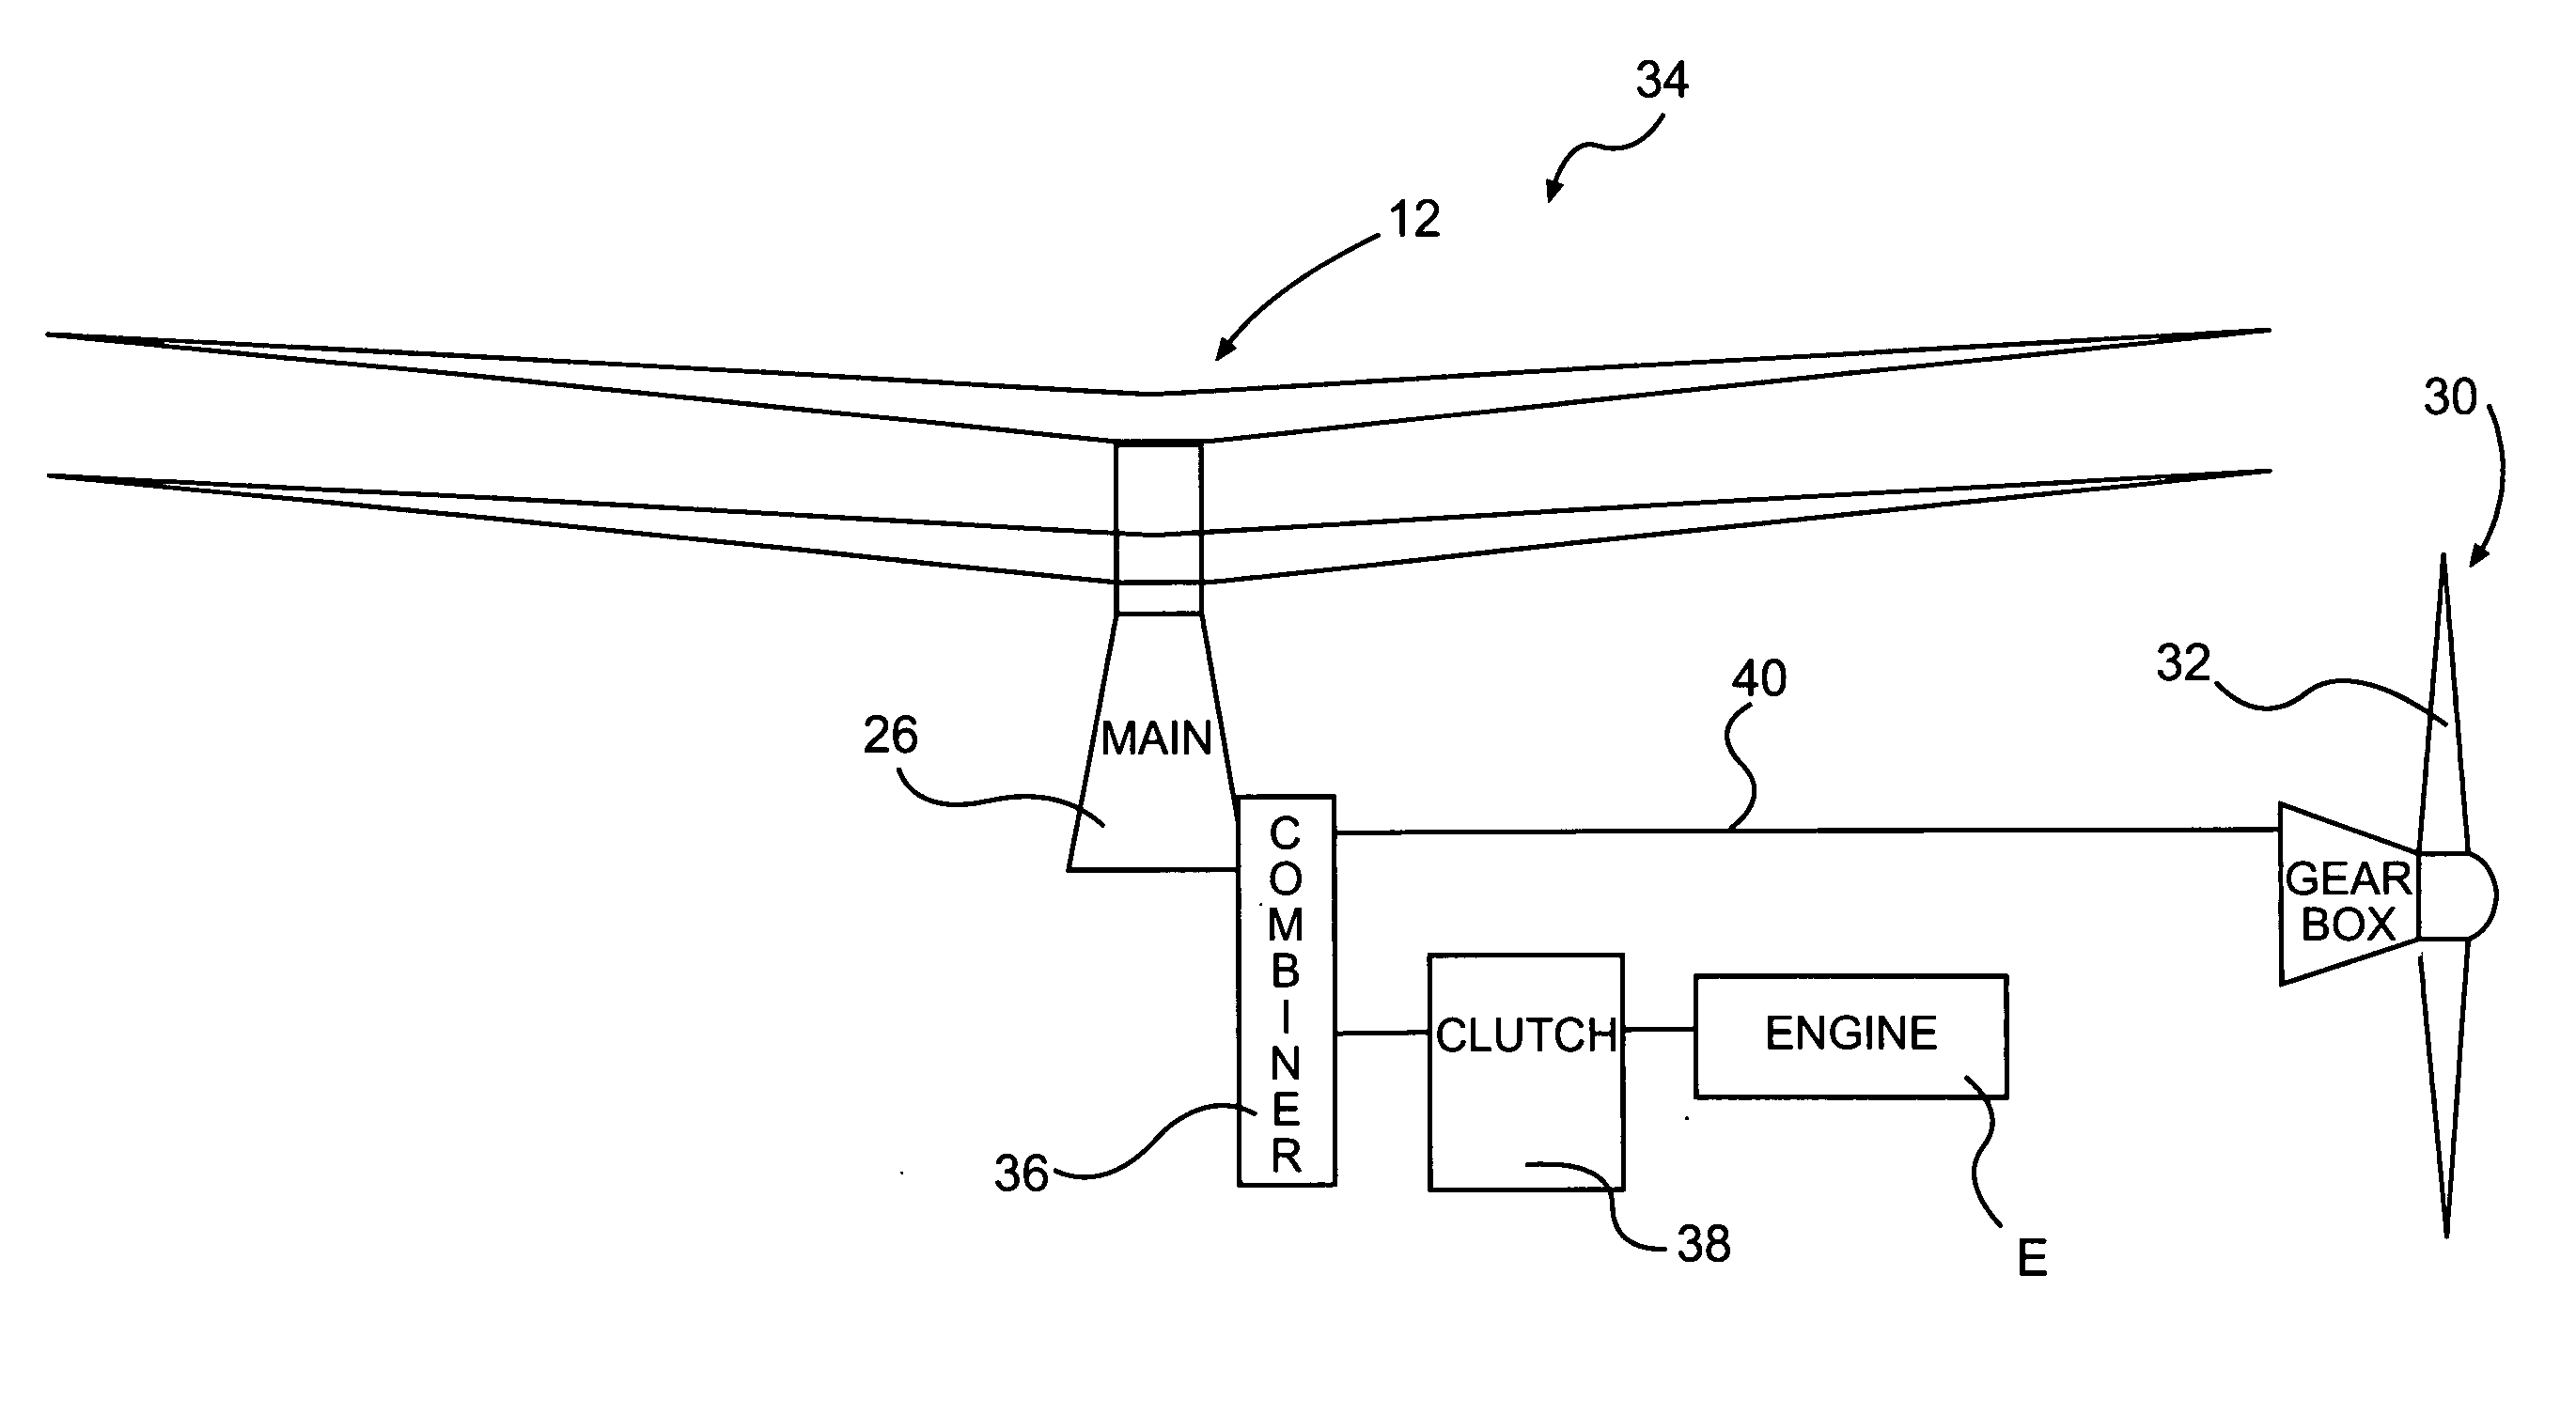 Rotor drive and control system for a high speed rotary wing aircraft